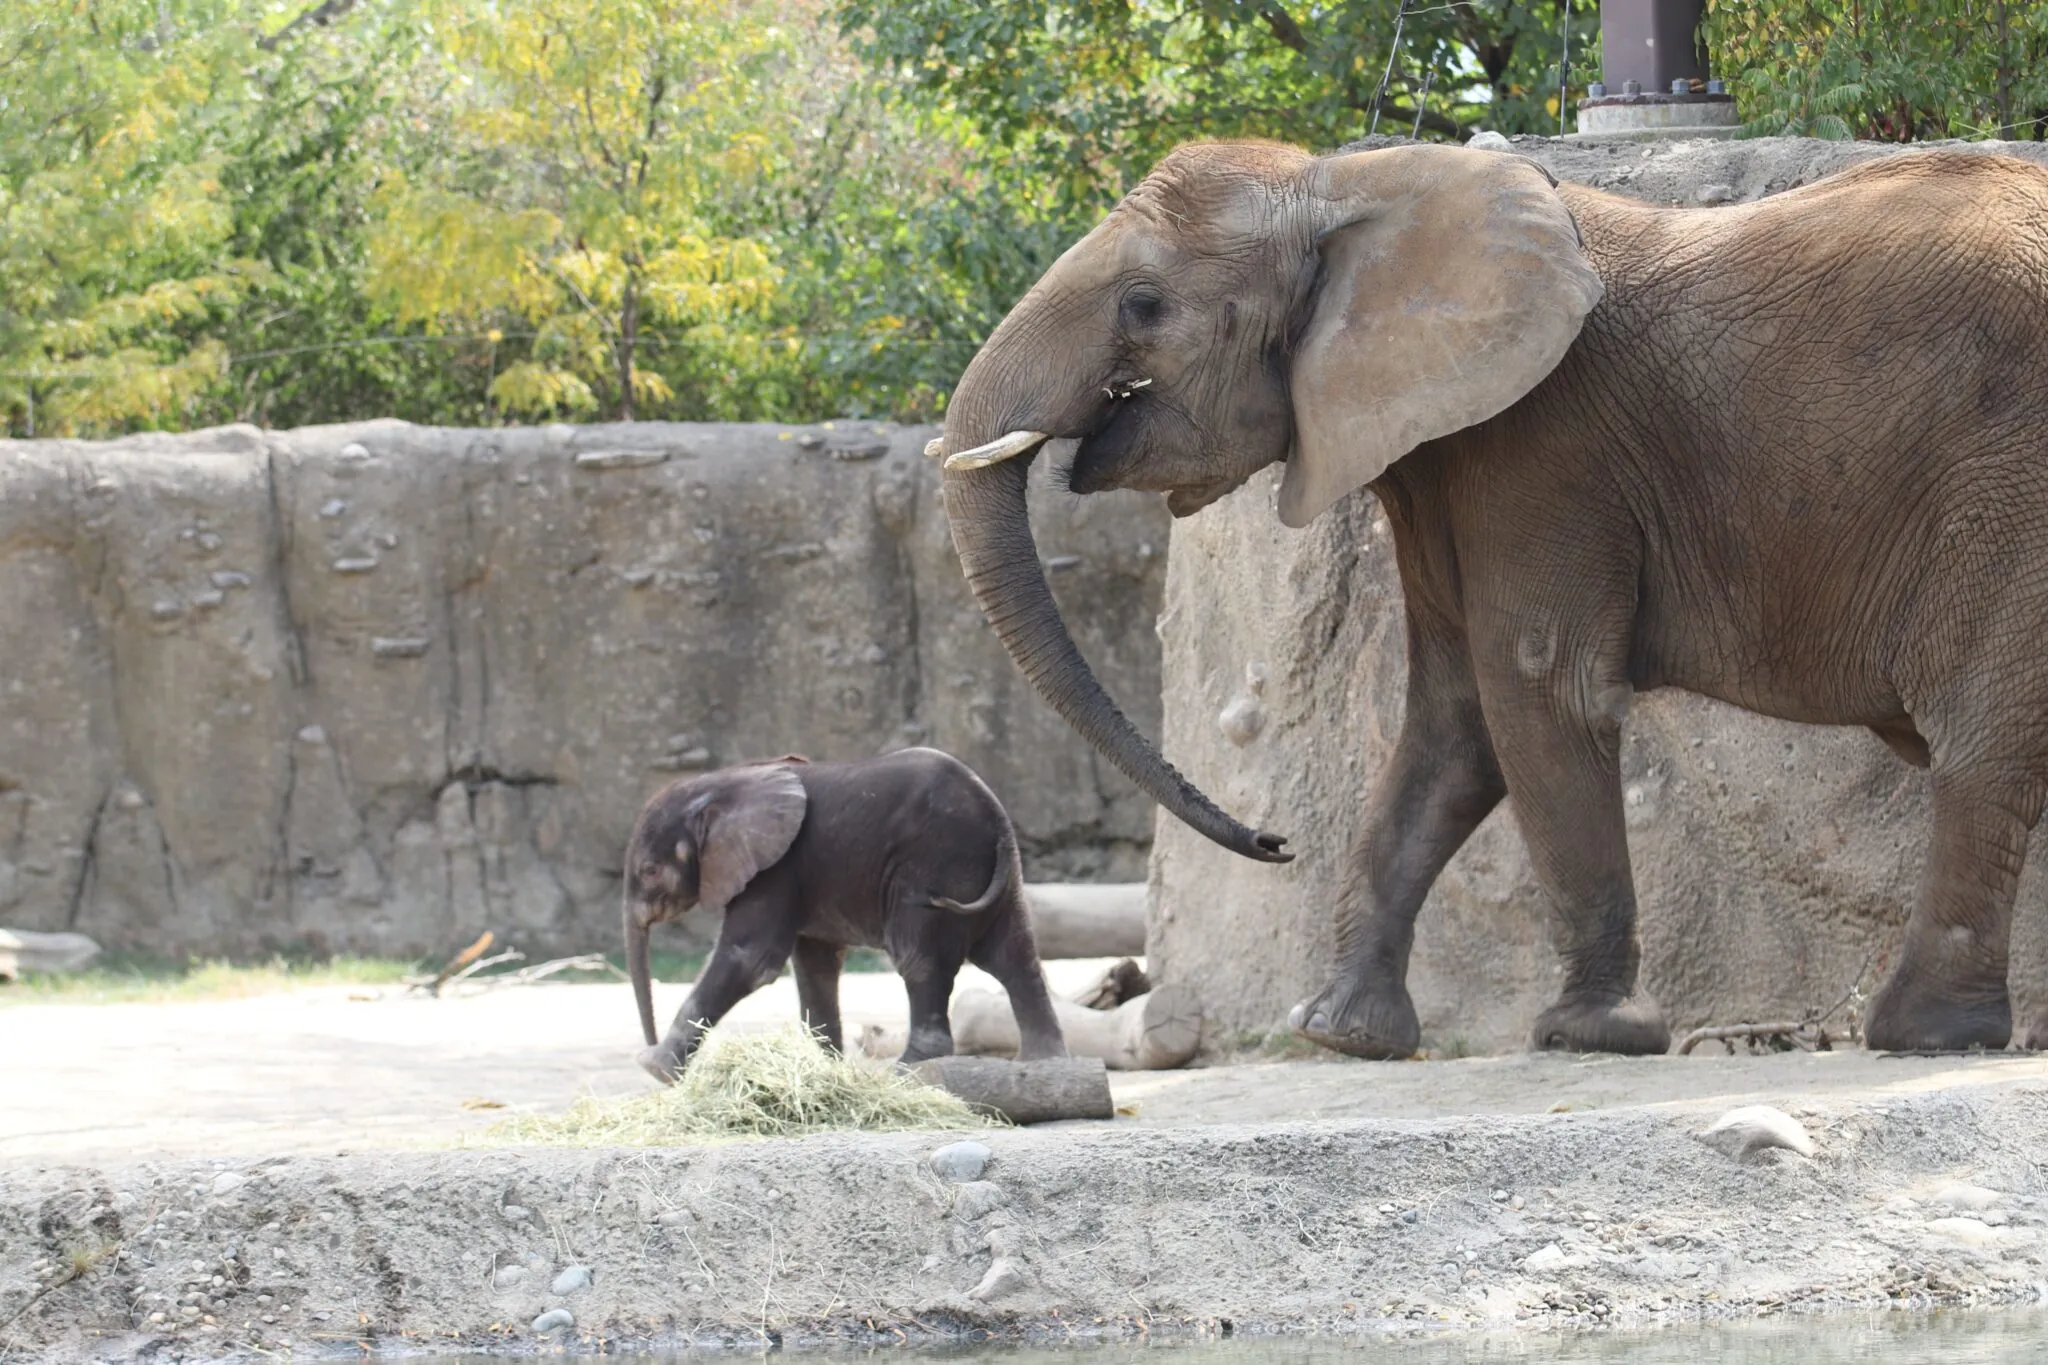 Elephant calf walking with mother